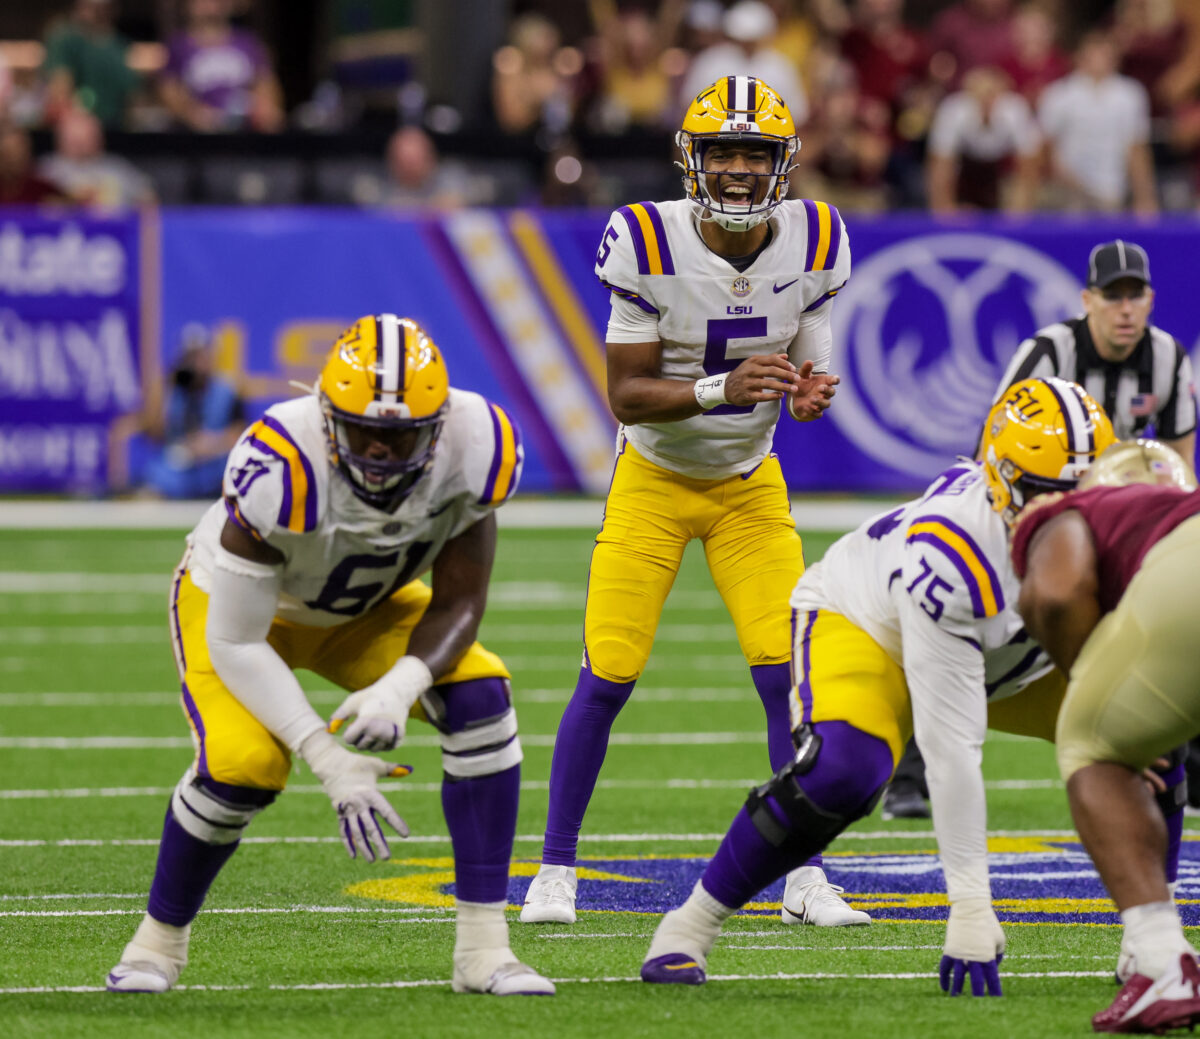 Best prop bets for the LSU Tigers’ Week 2 matchup